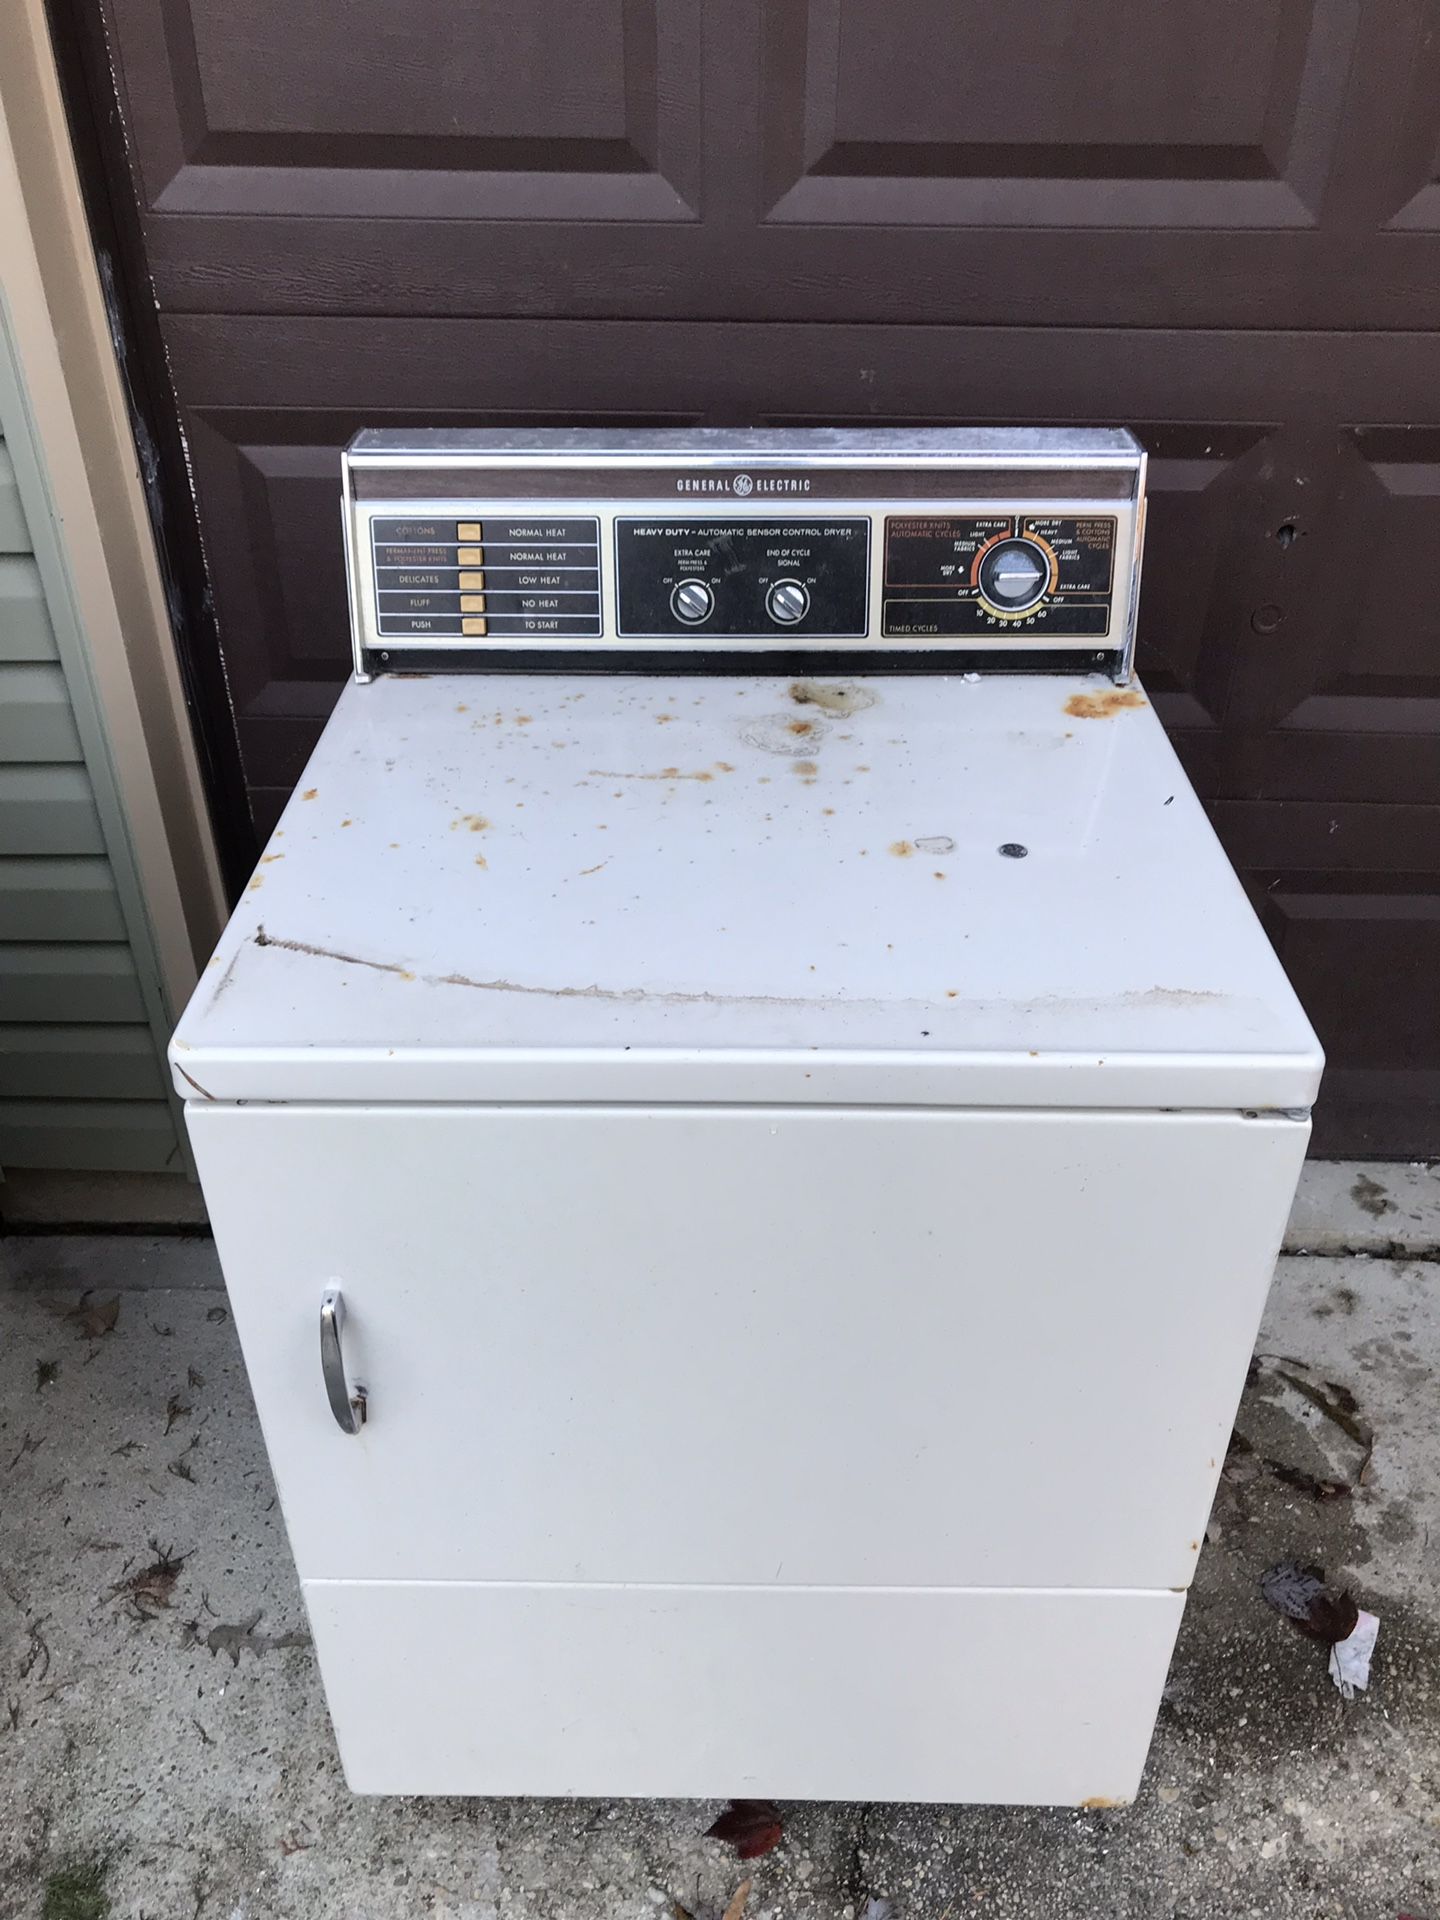 Old working dryer for free